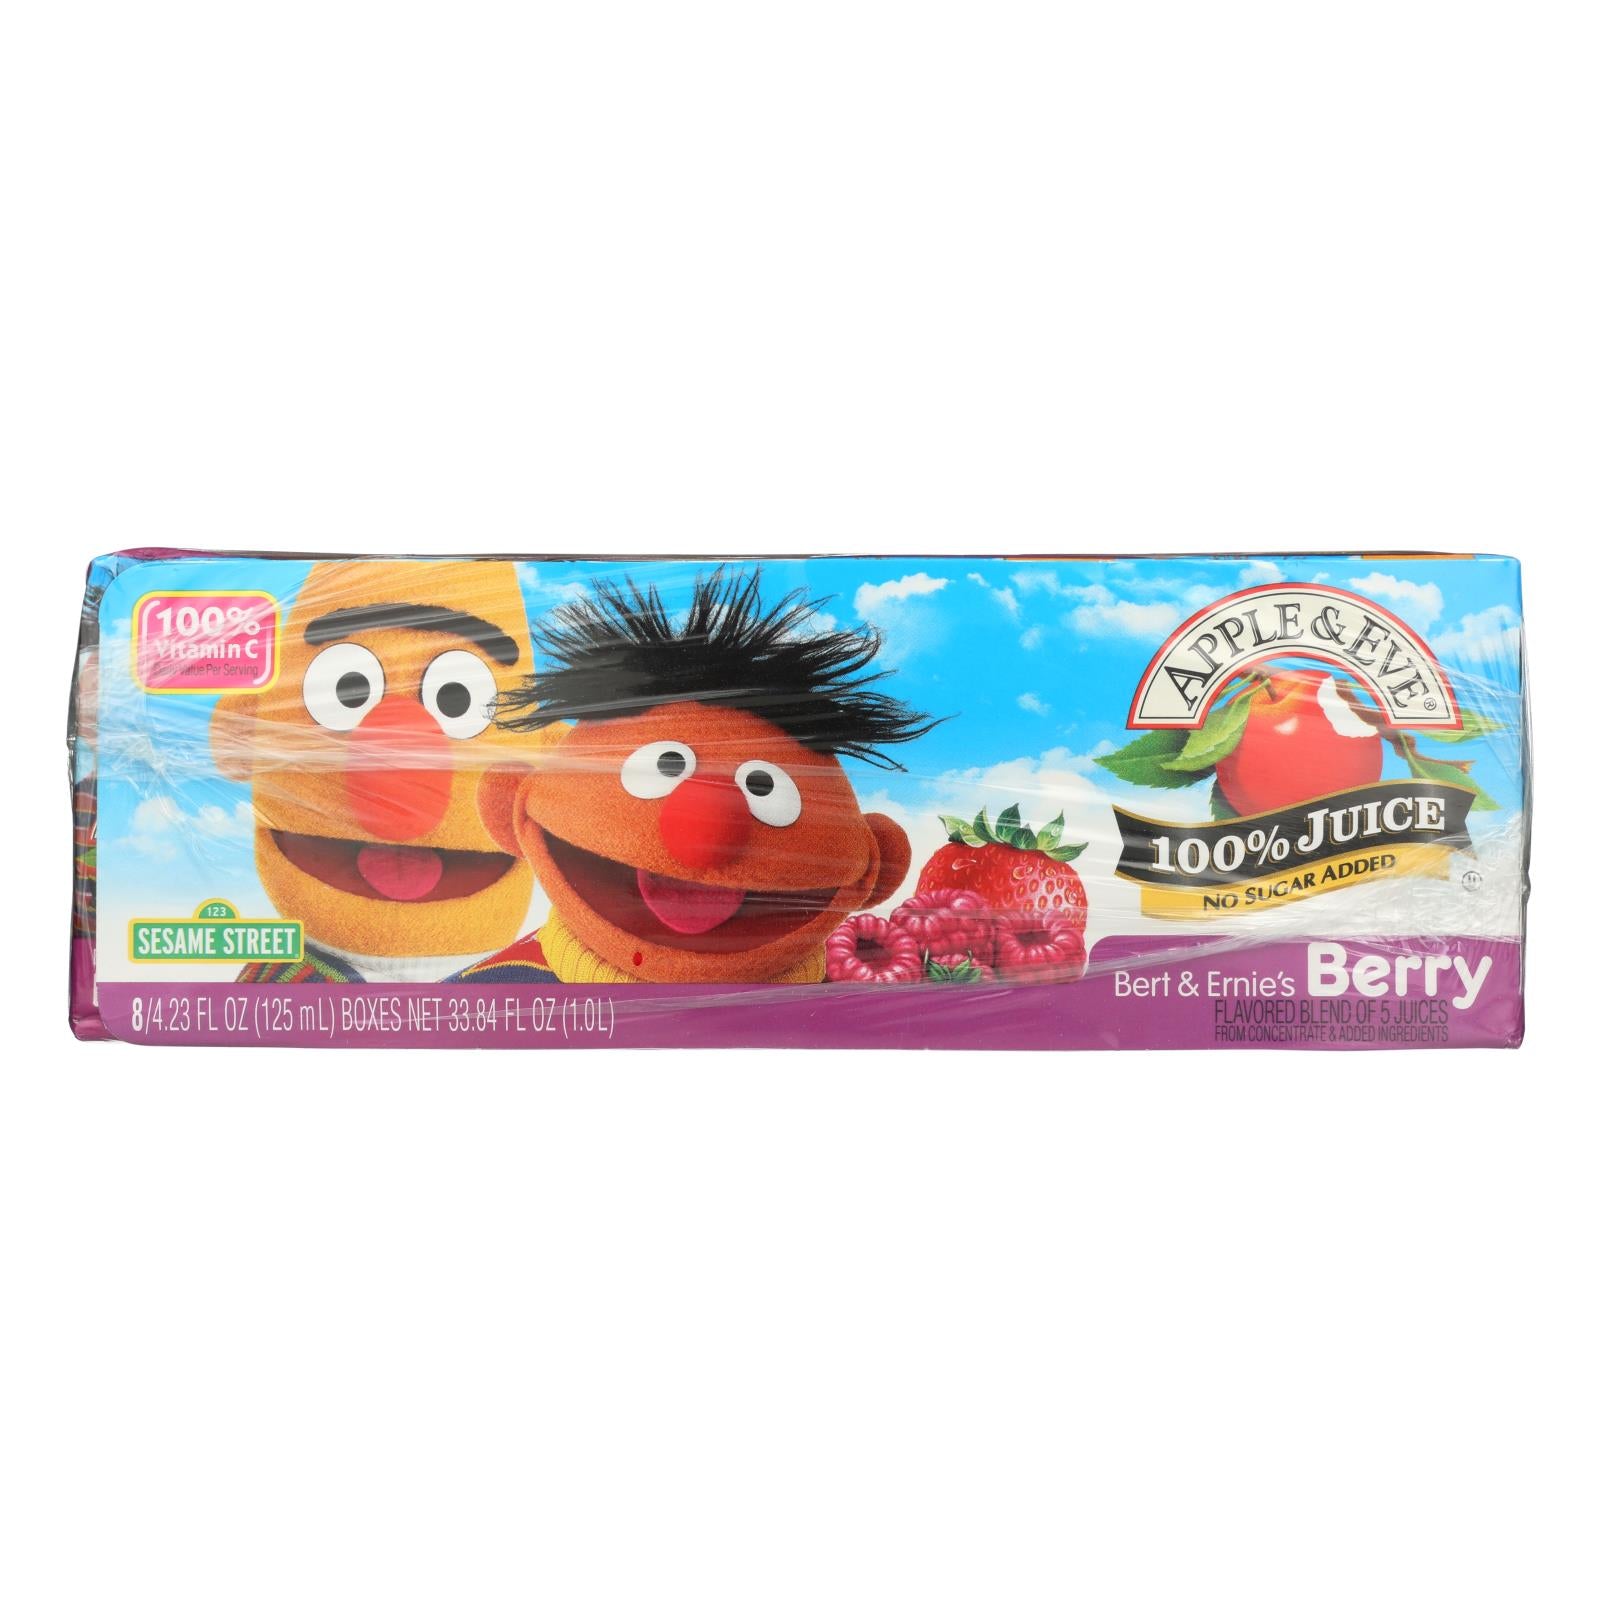 Apple & Eve, Apple and Eve Sesame Street 100 Percent Juice - Bert and Ernie's Berry - Case of 5 - 125 ml (Pack of 5)